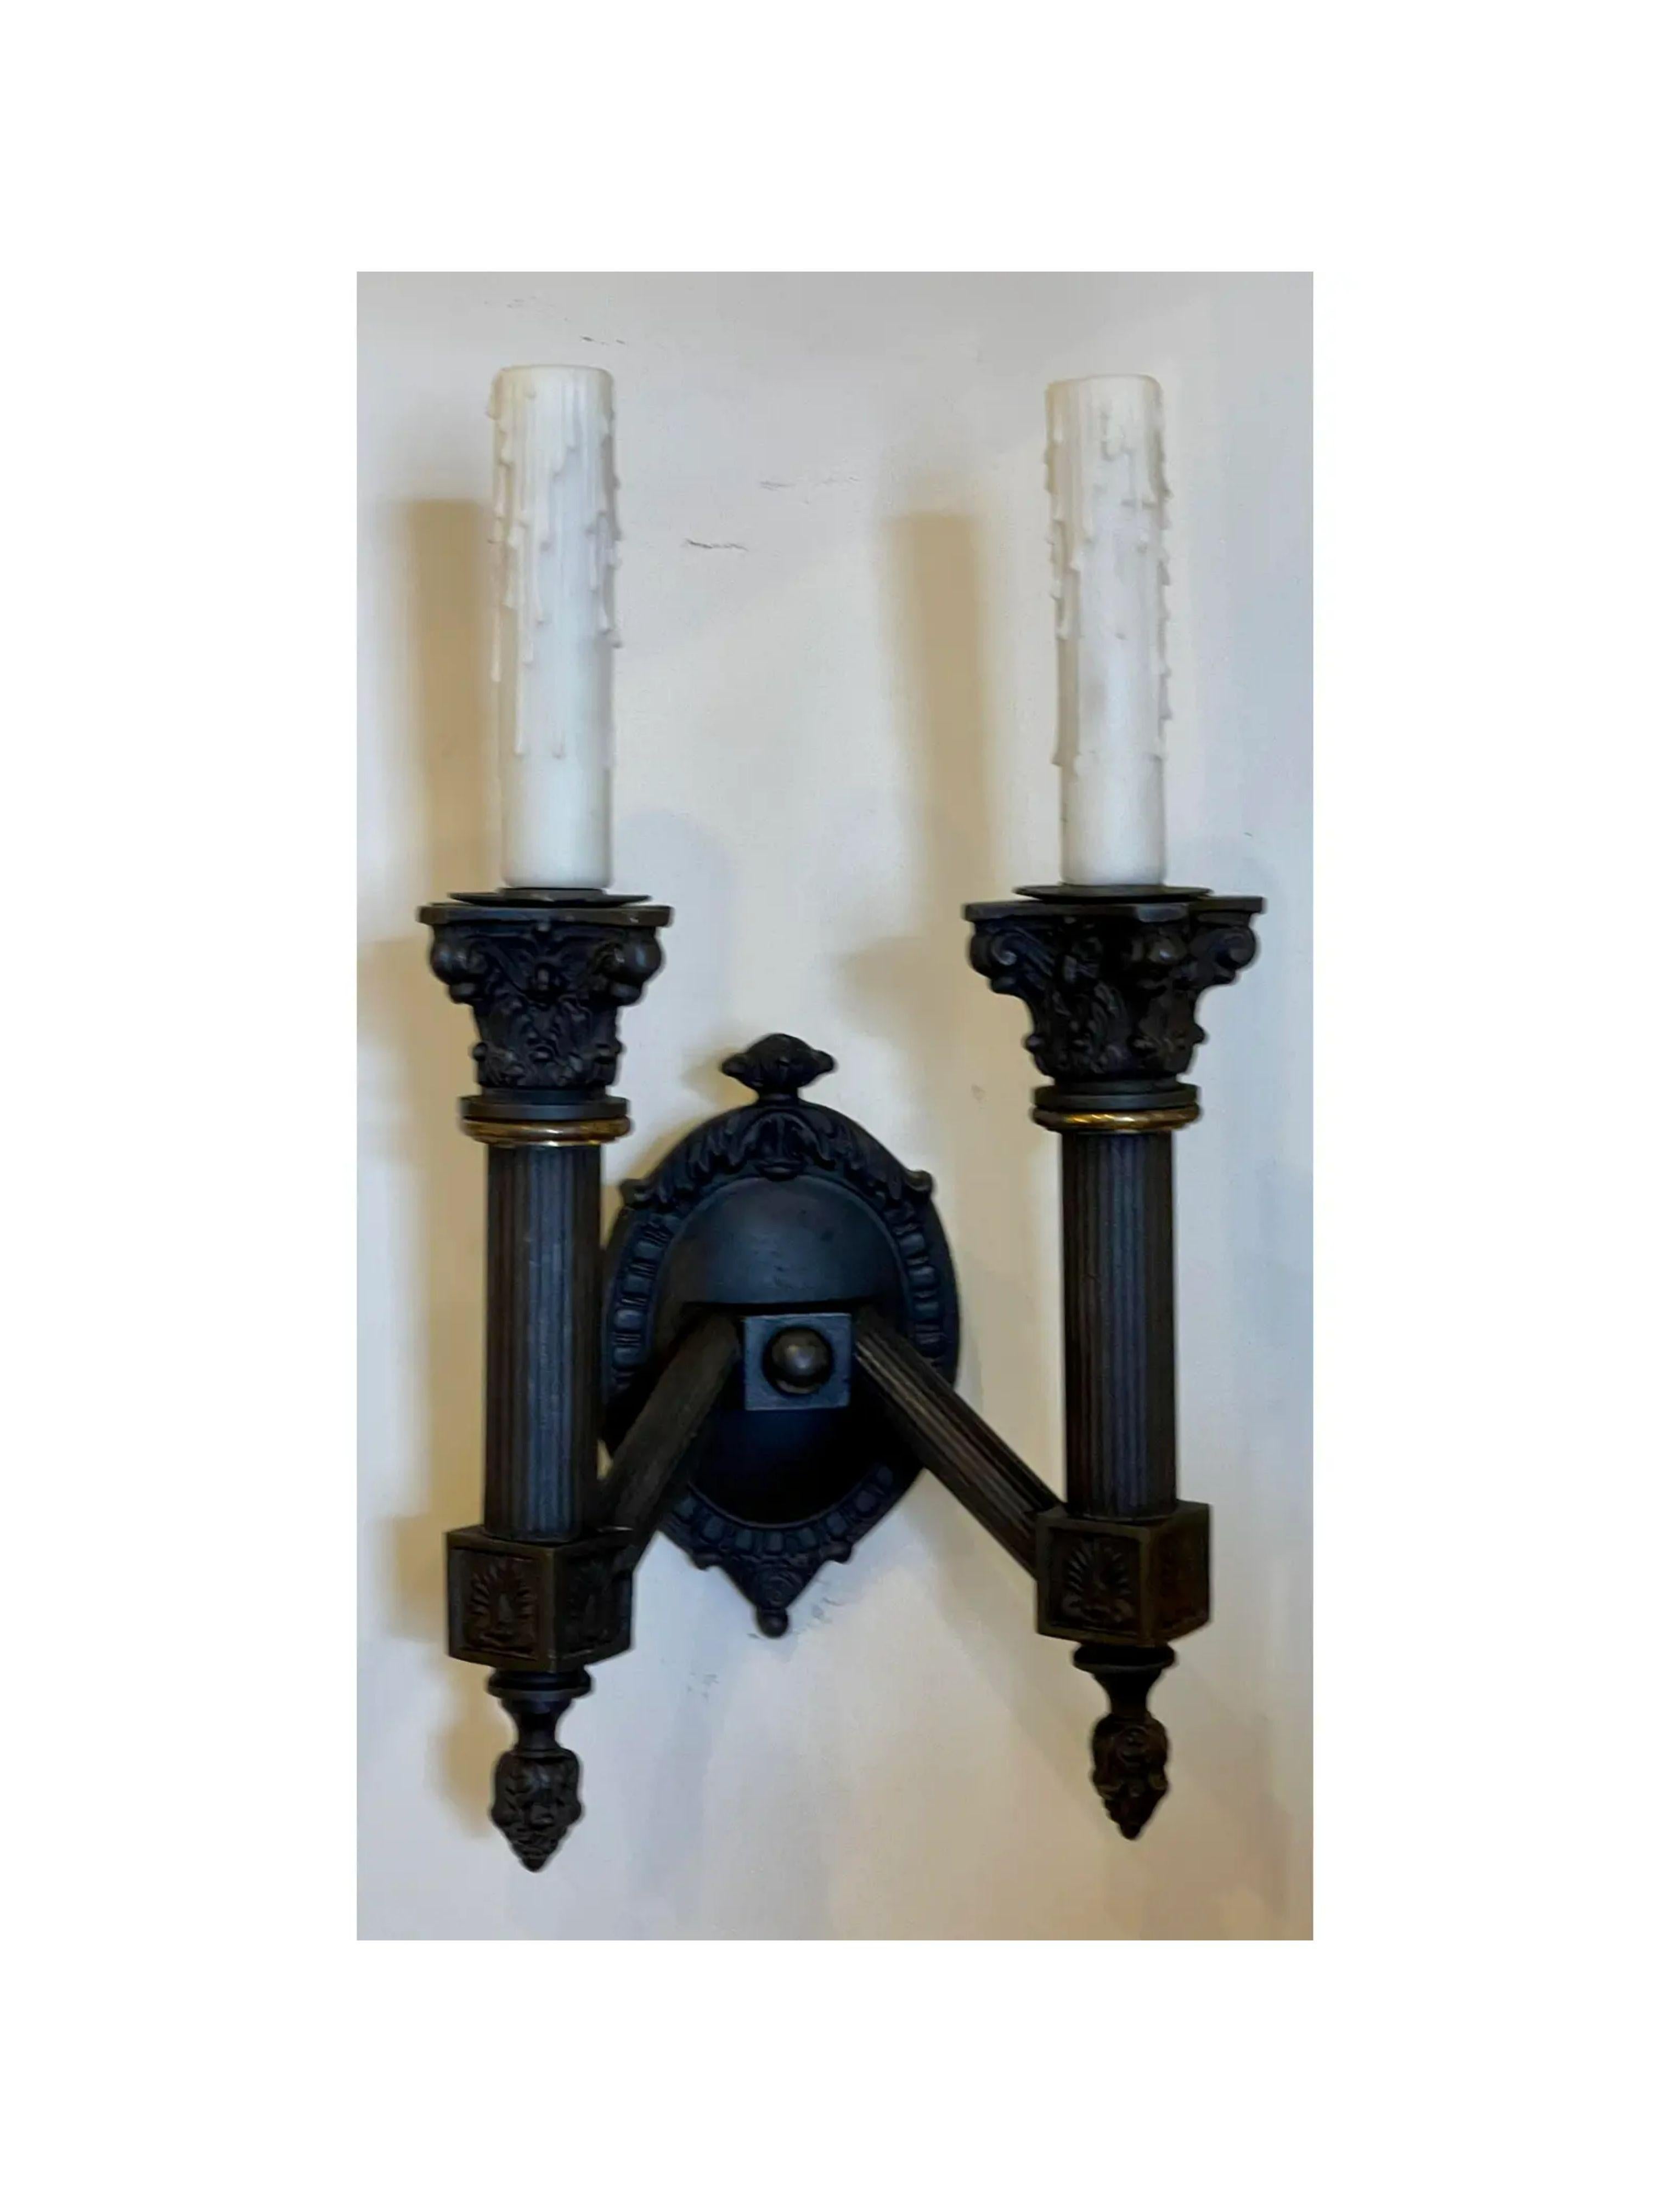 19th C style empire black Neoclassical Corinthian Column 2 Lite wall sconce
Priced Each.

Additional information:
Materials: bronze
Color: Black
Period: 2010s
Styles: Empire, Neoclassical
Lamp Shade: Not Included
Power Sources: Up to 120V